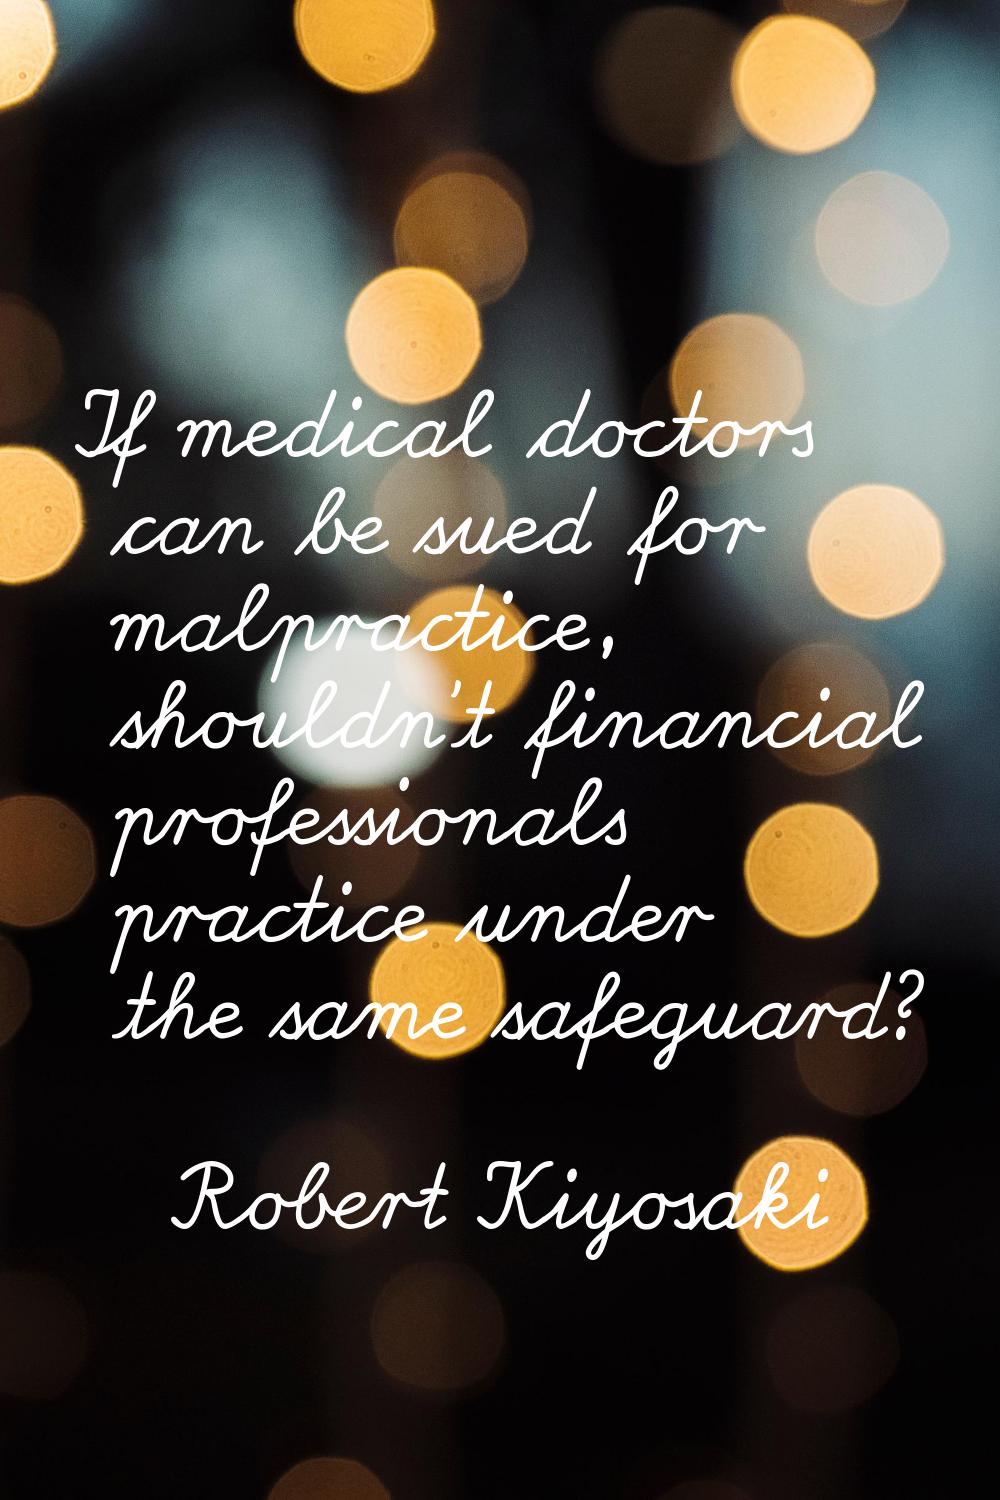 If medical doctors can be sued for malpractice, shouldn't financial professionals practice under th